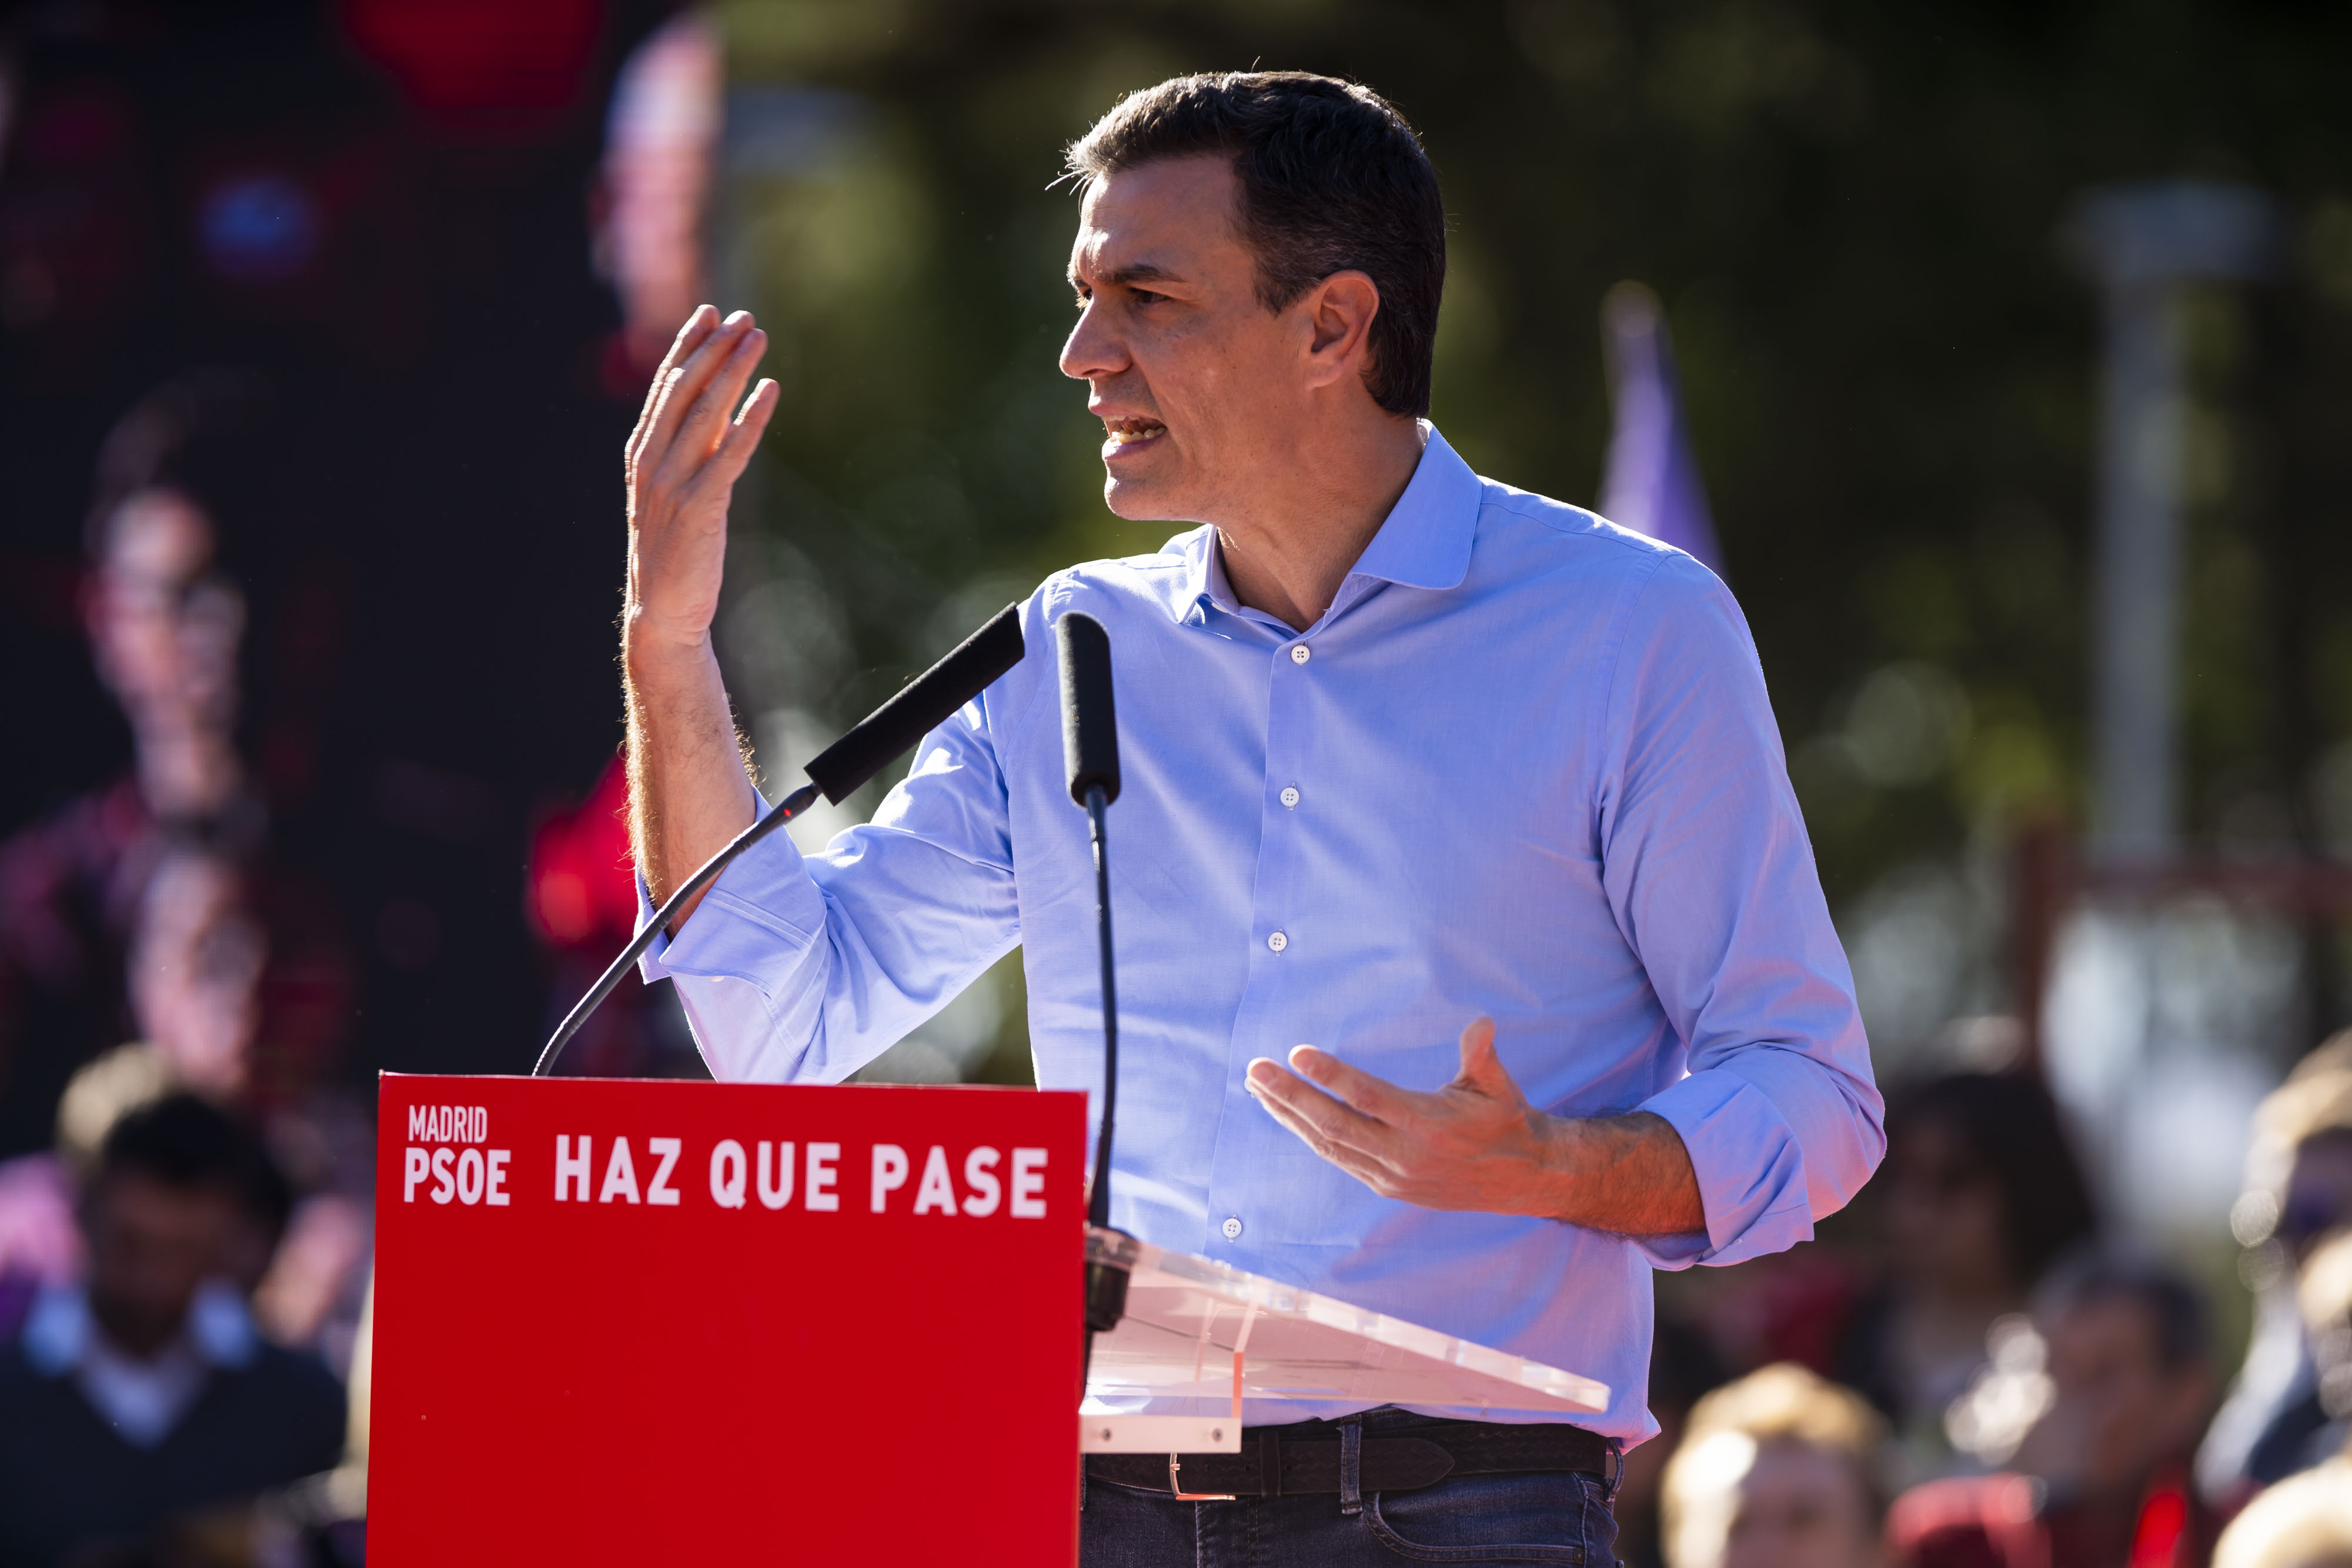 Pedro Sanchez, Spain's prime minister, speaks to his supporters during a campaign rally in Madrid, Spain, on Friday, April 26, 2019.&nbsp;